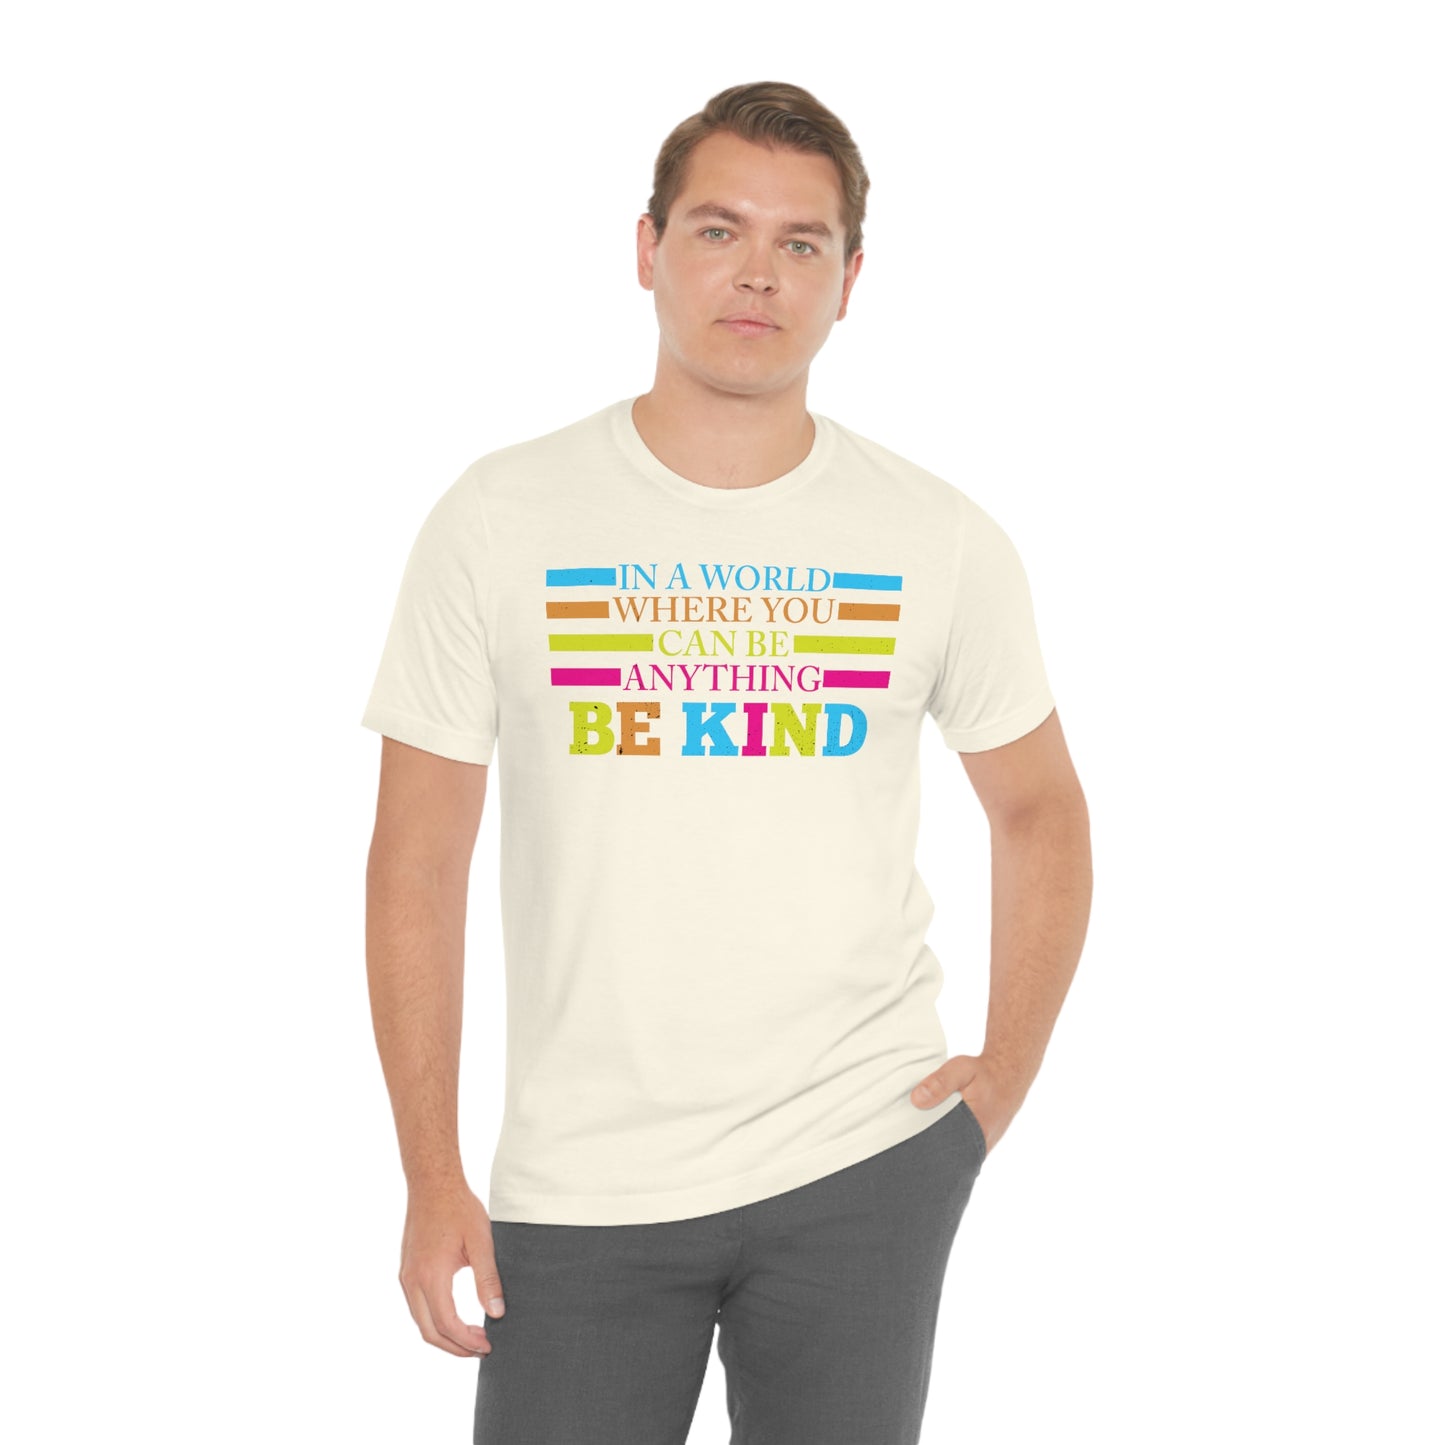 In A World Where You Can Be Anything Be Kind Shirt,Be Kind Rainbow Shirt,Be Kind Shirt,Language shirt,Kindness shirt,Watercolor Be Kind